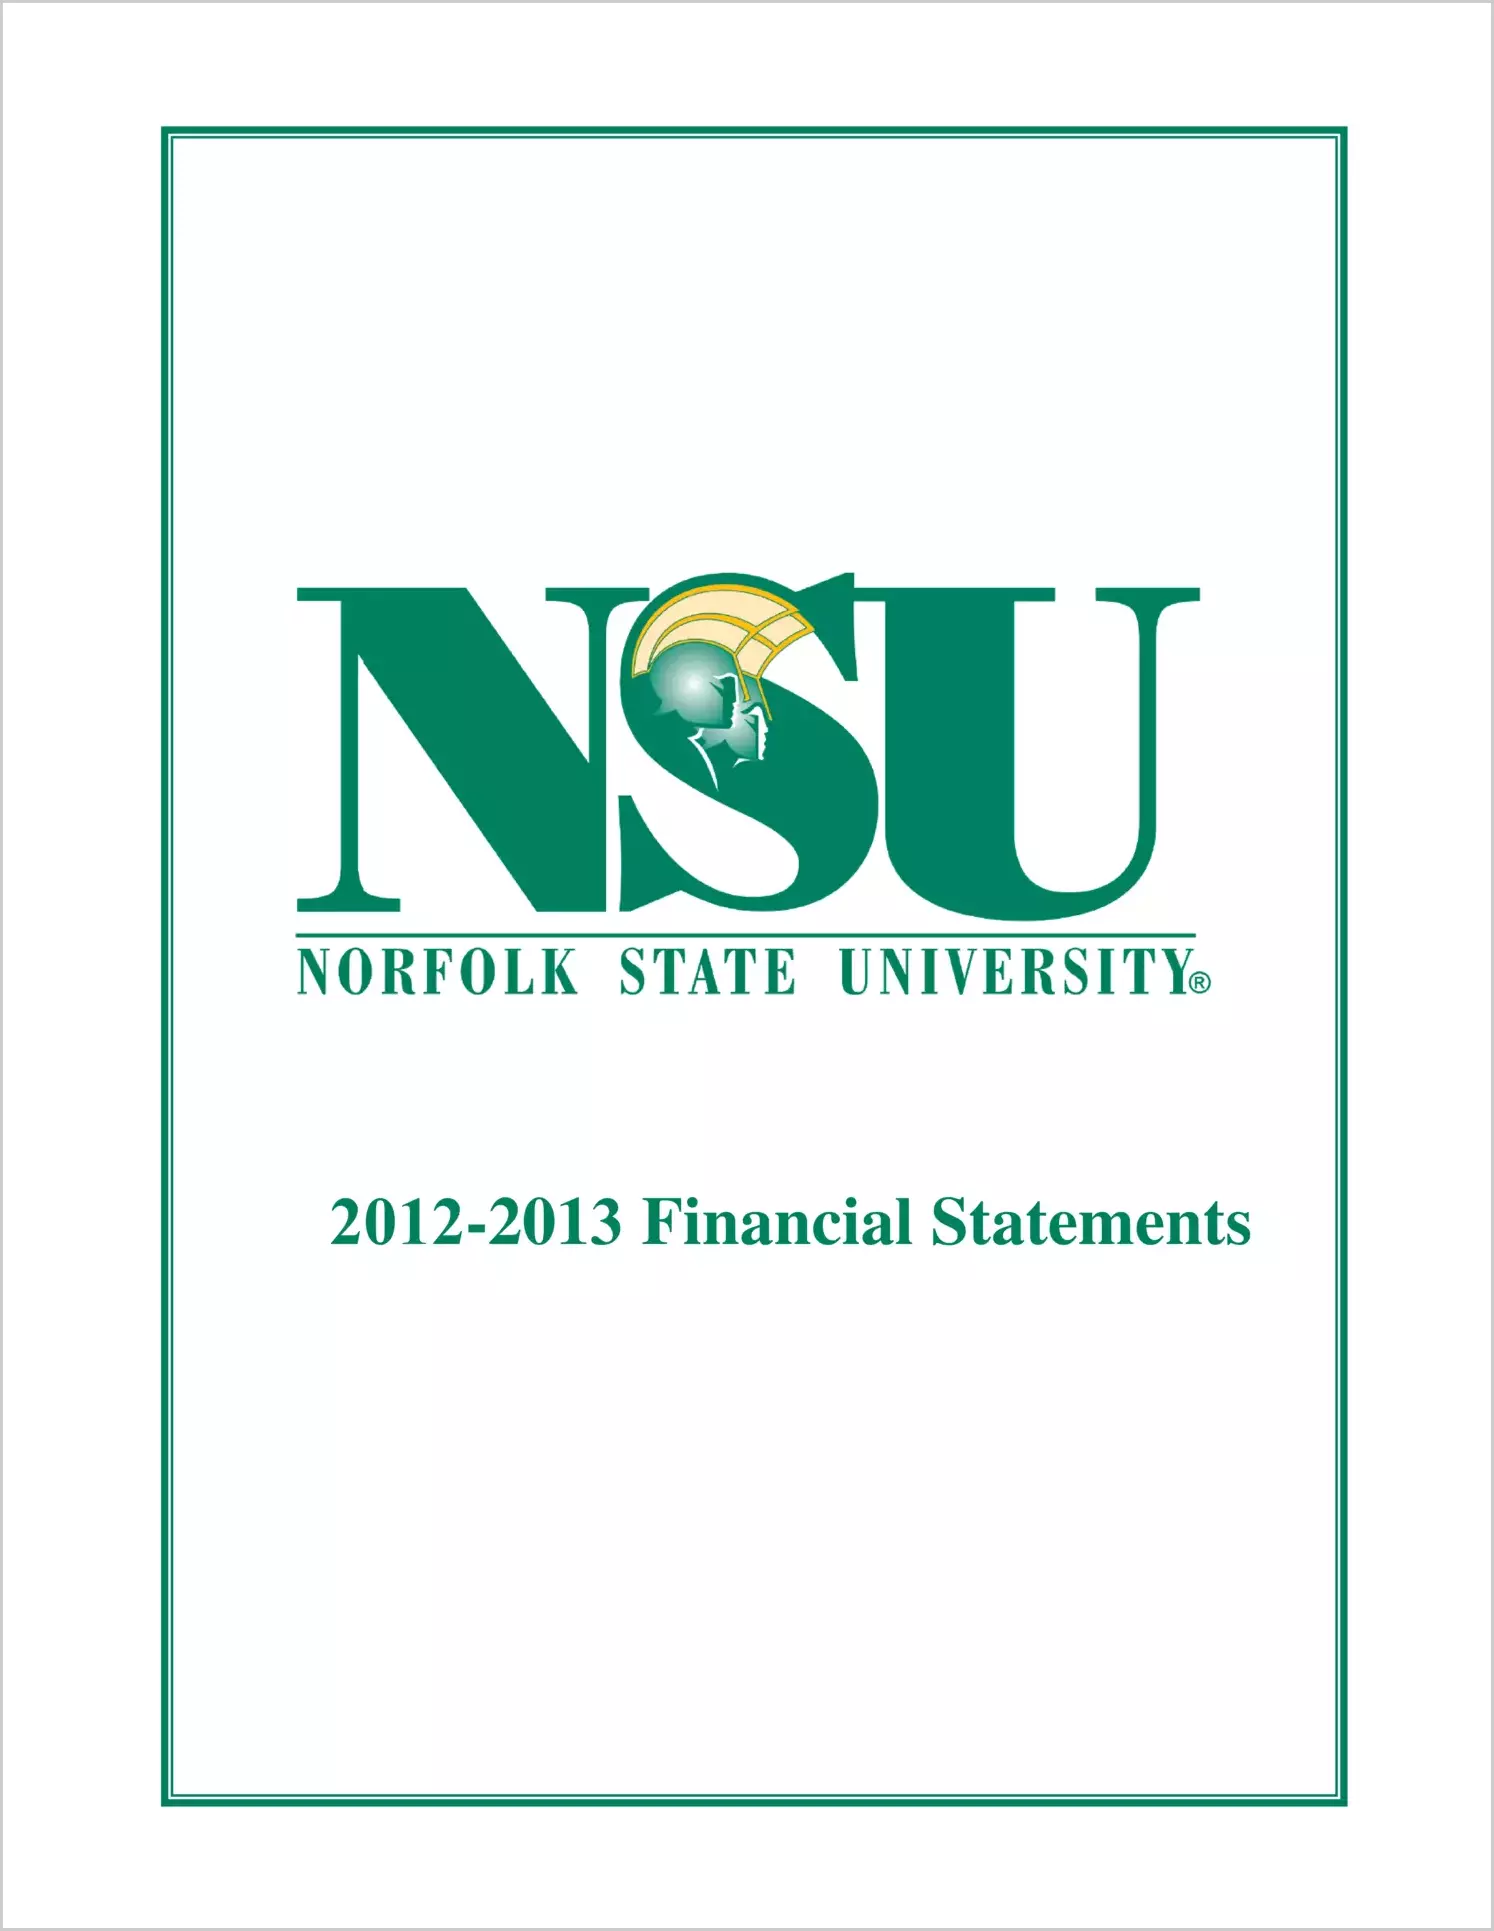 Norfolk State University Financial Statement Report for the year ended June 30, 2013